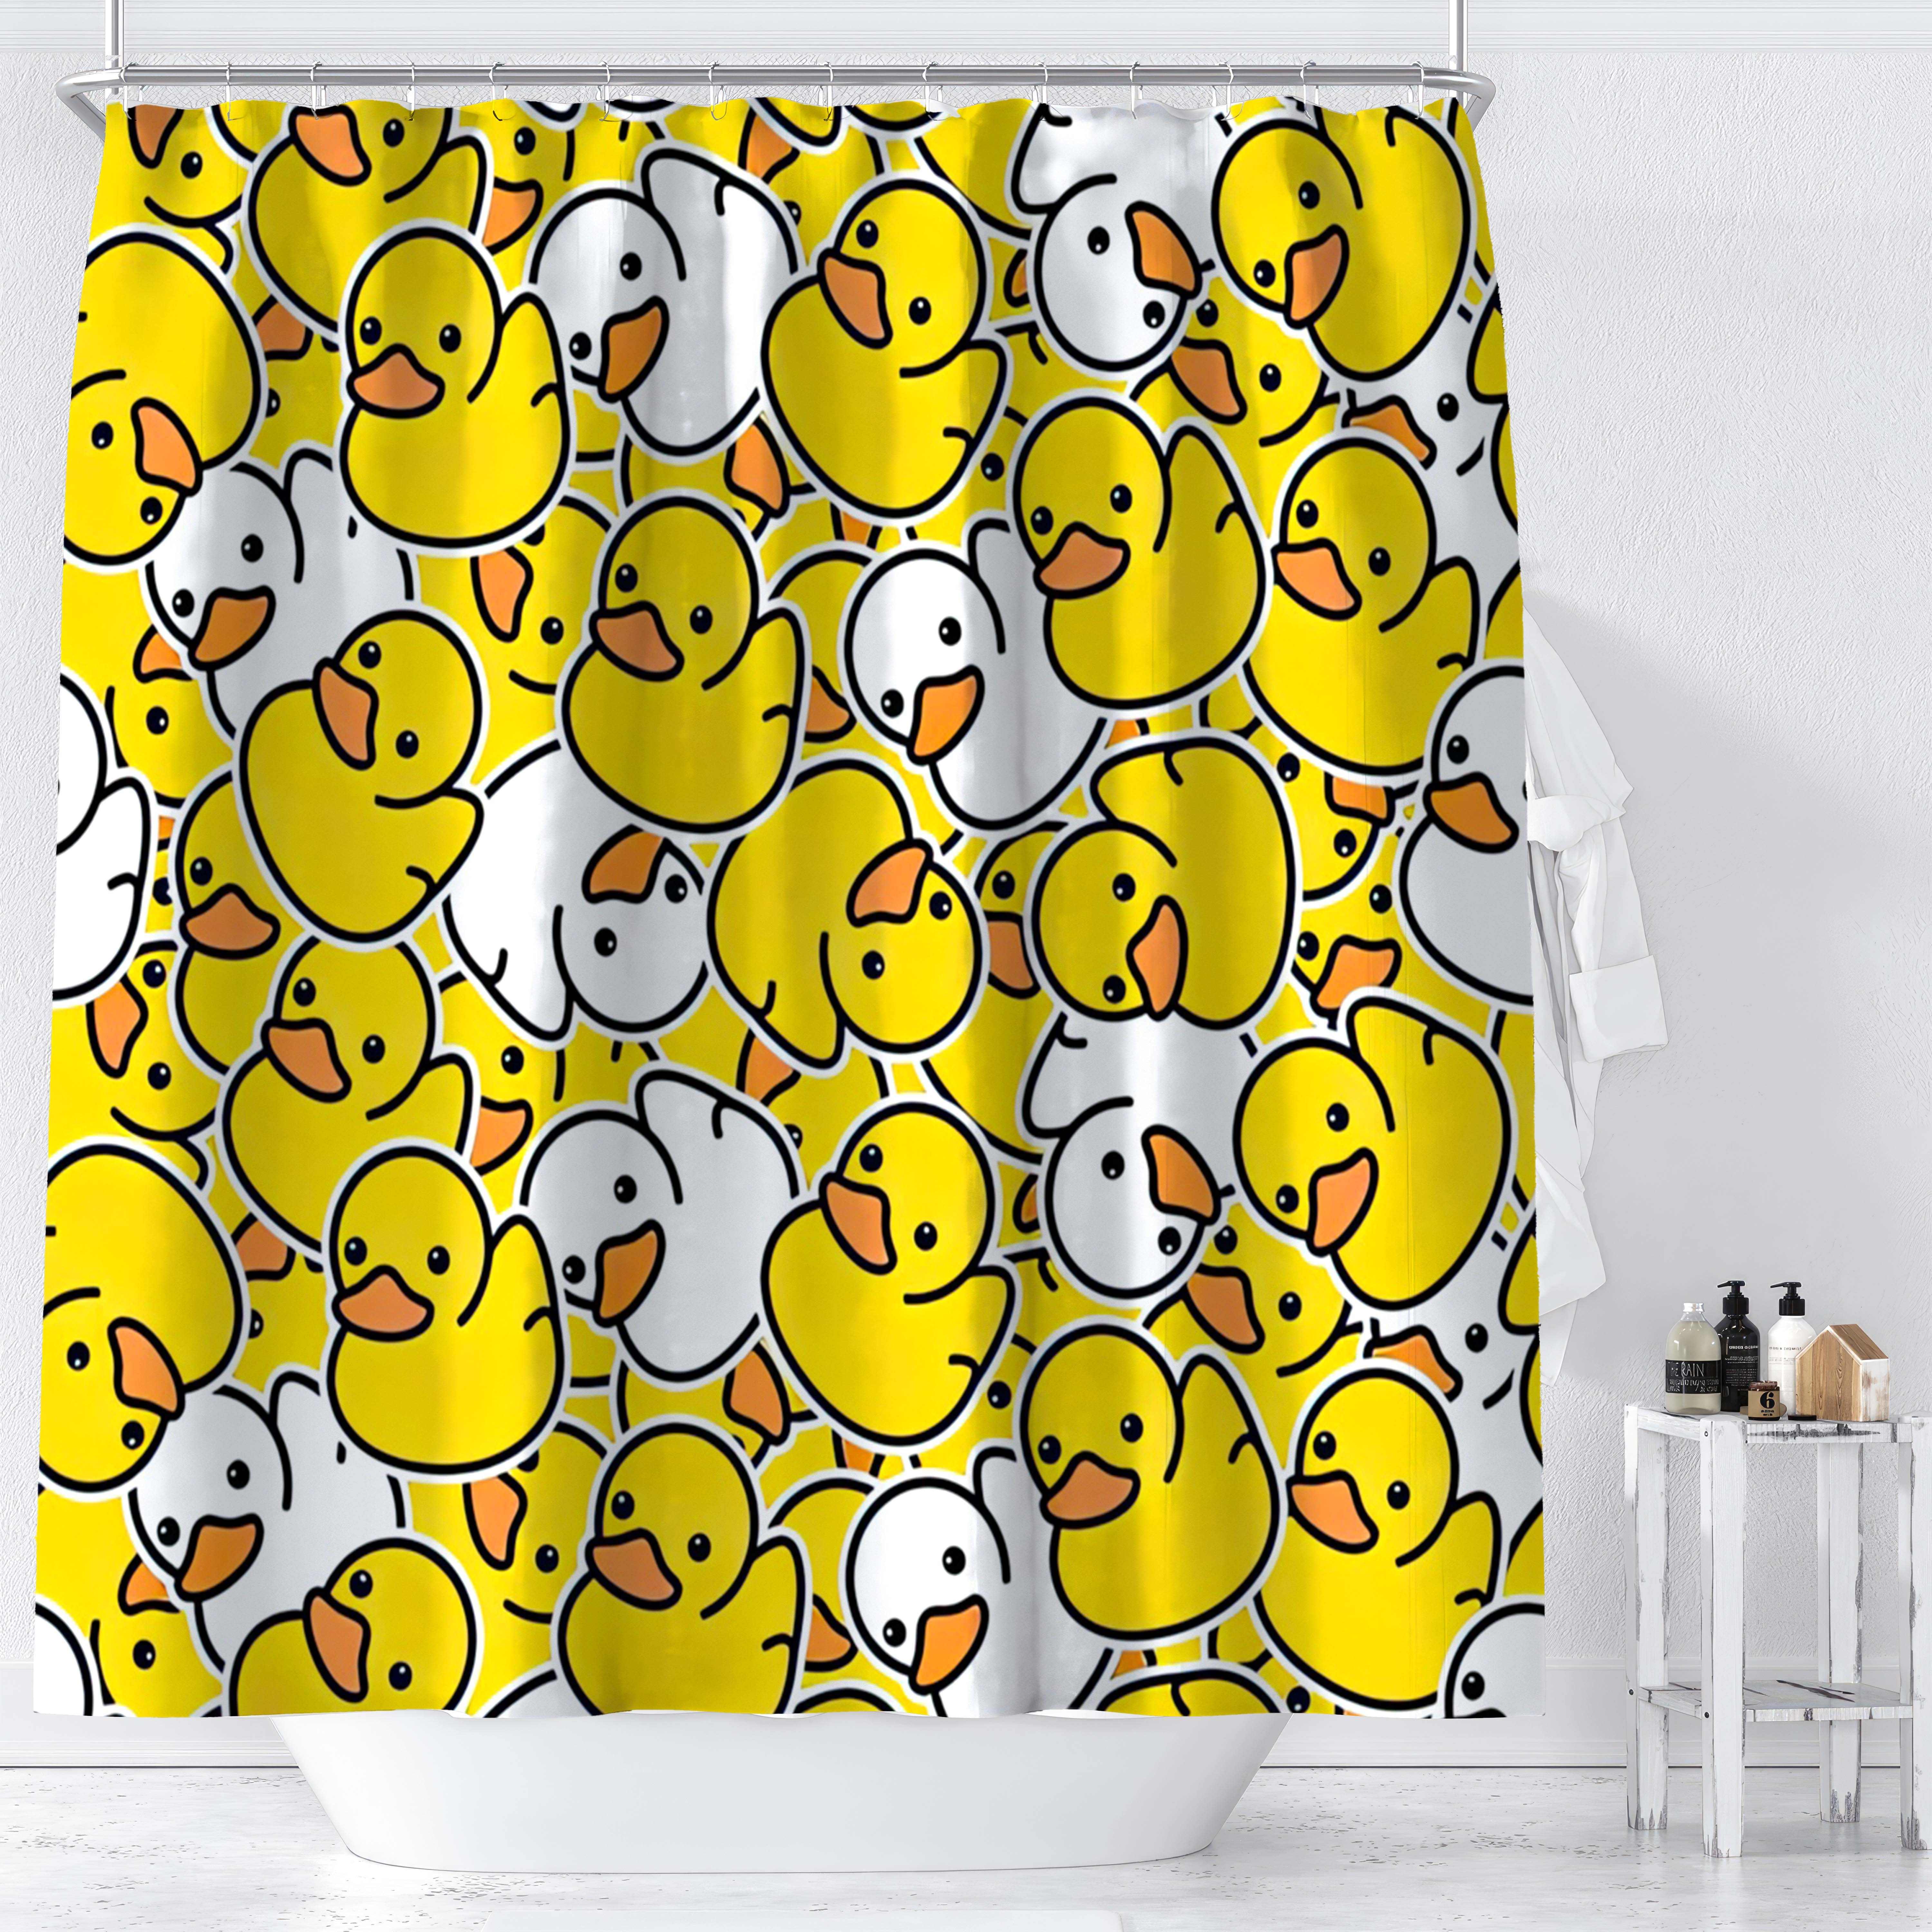 

charming Duck" Cute Duck Cartoon Shower Curtain - Waterproof, Easy-care Polyester With Hooks Included